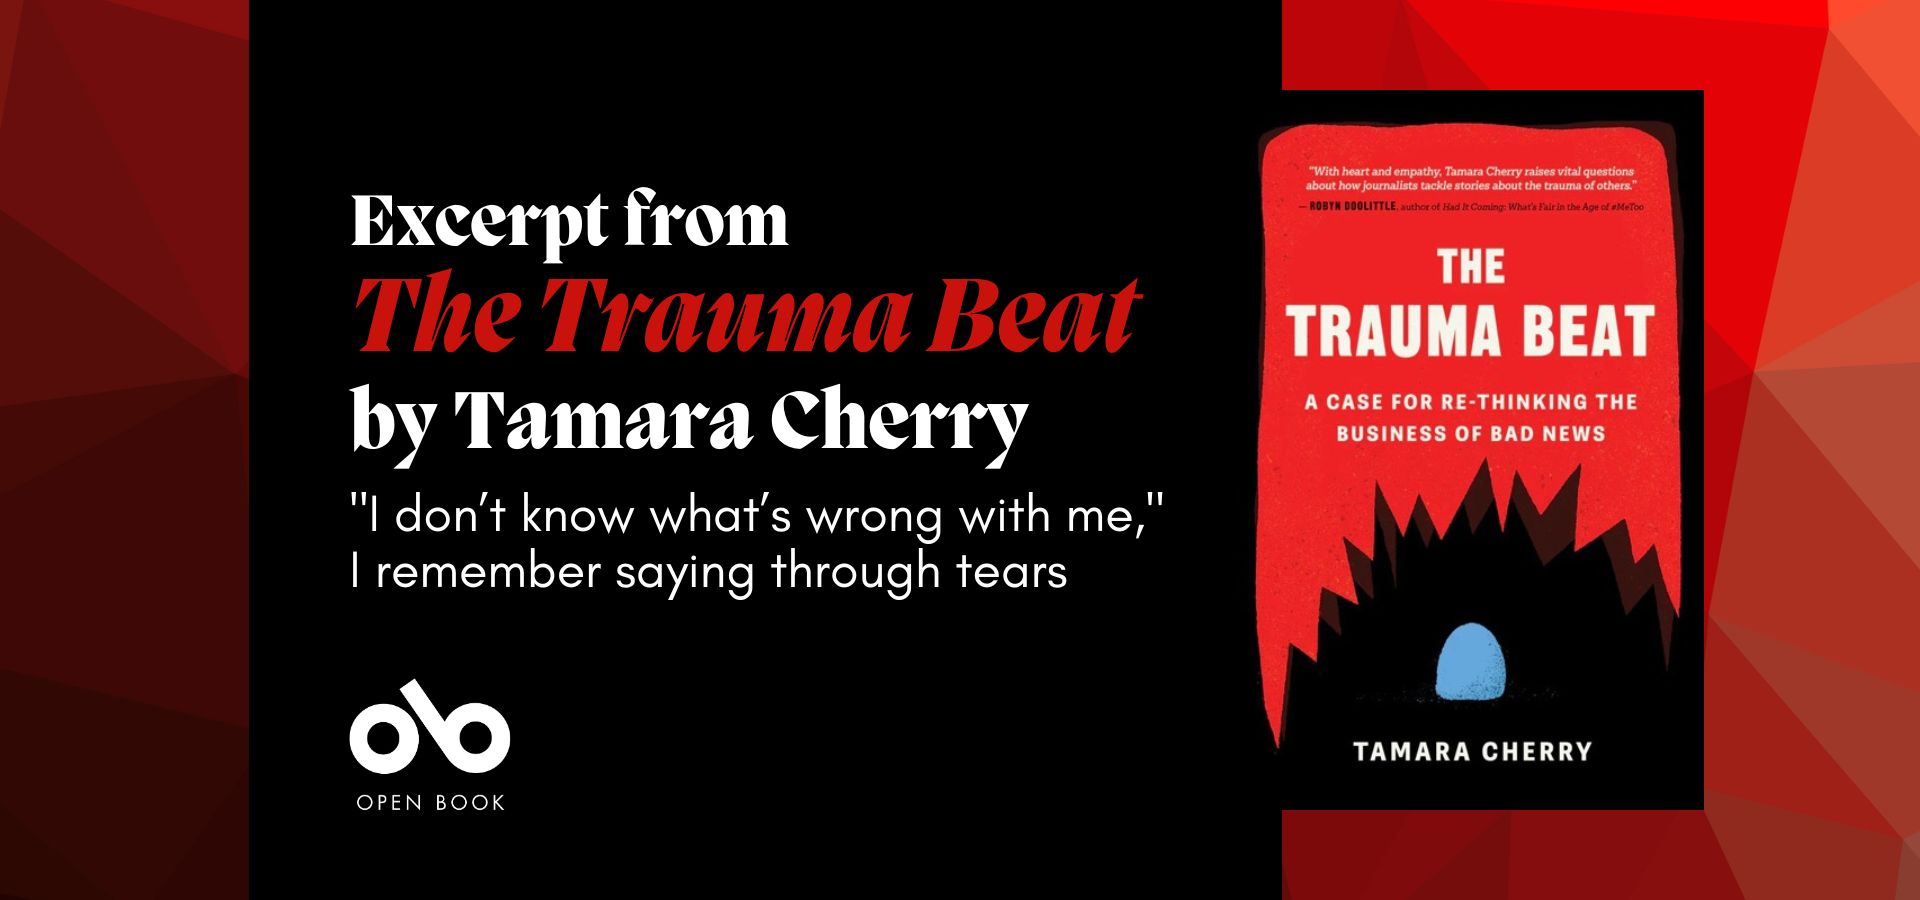 Red and black banner image with the cover of Tamara Cherry's The Trauma Beat and text reading "Excerpt from The Trauma Beat by Tamara Cherry. "I don’t know what’s wrong with me," I remember saying through tears